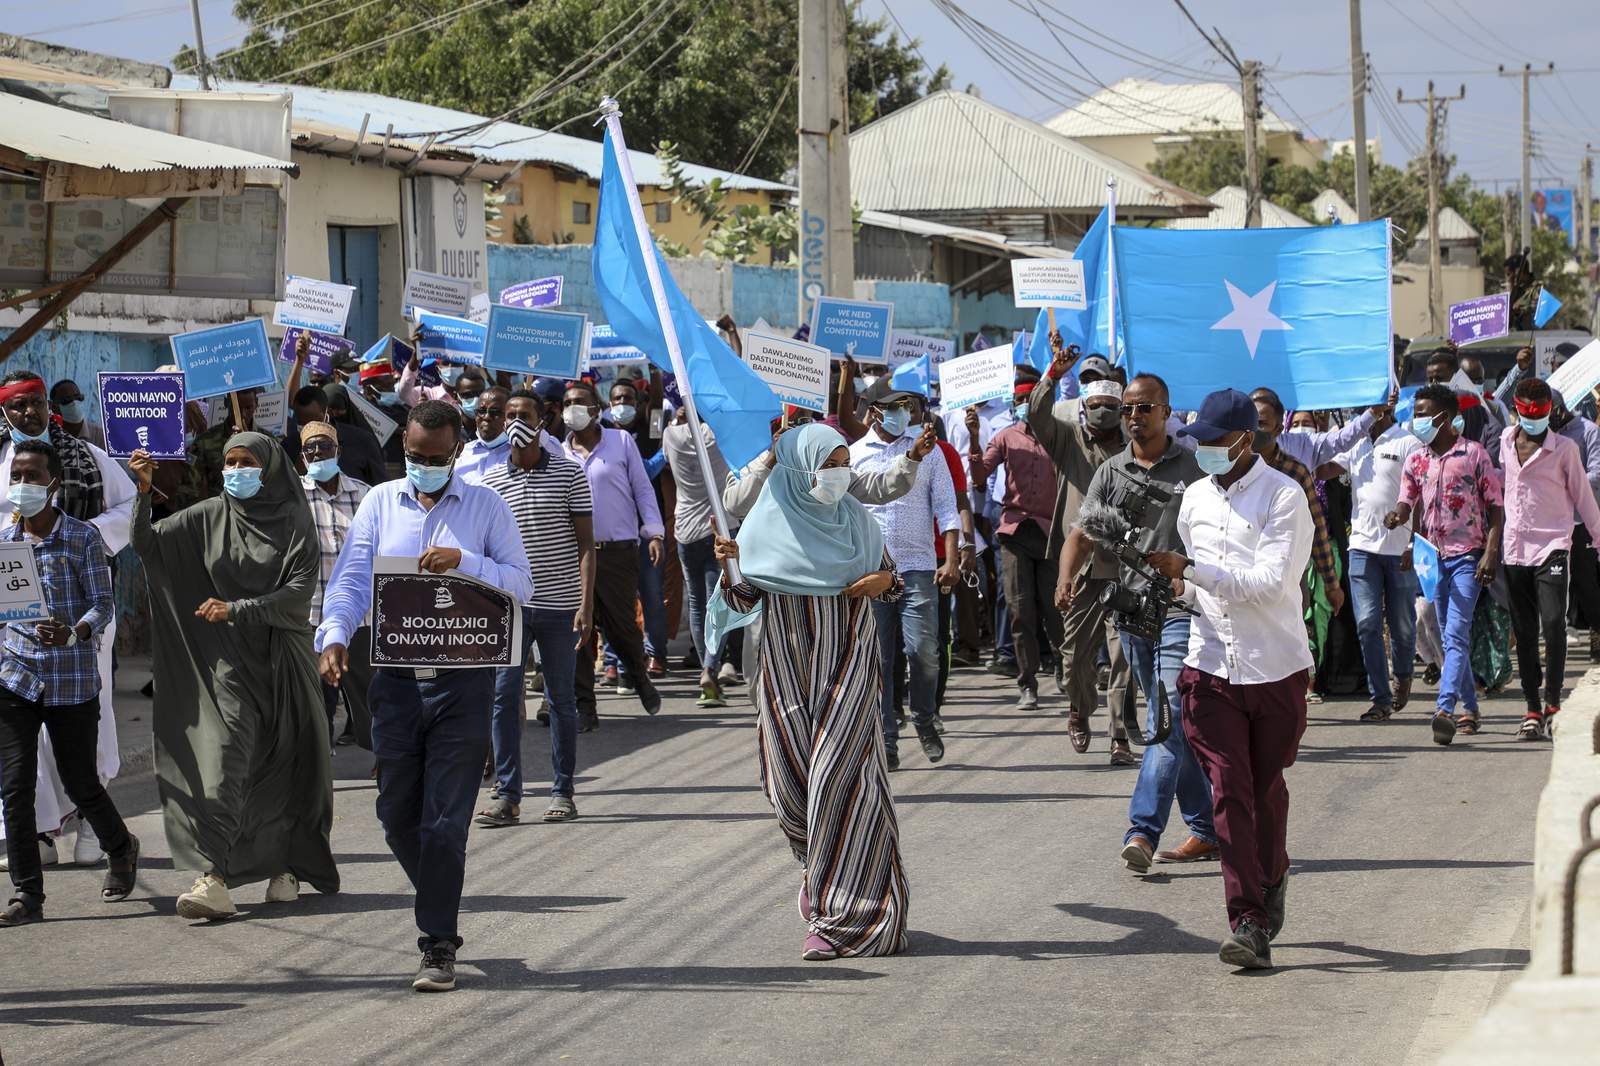 Somali security forces fire on protest over delayed election